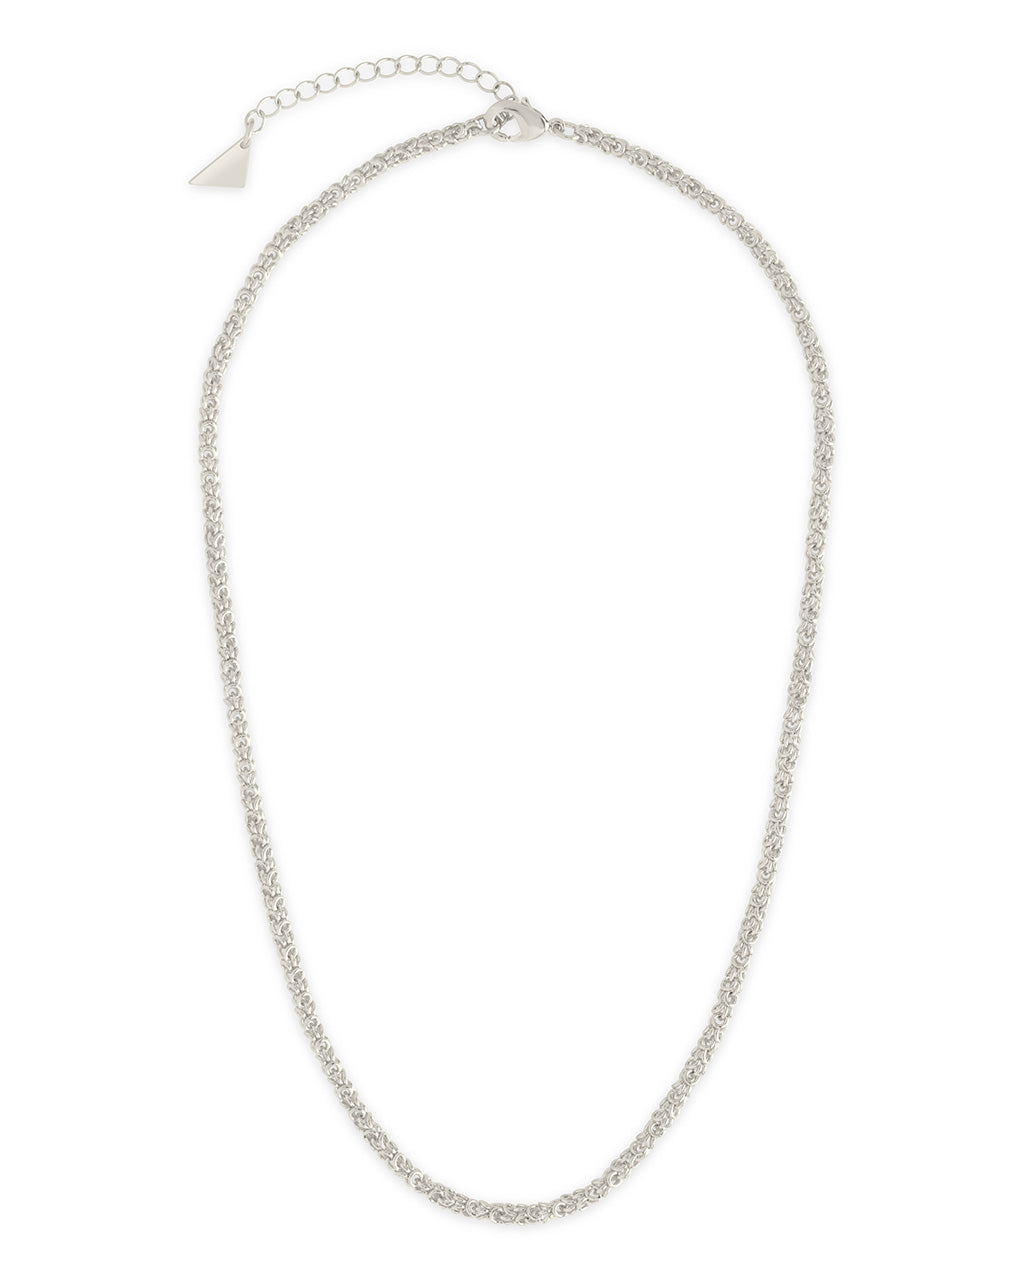 Moira Chain Necklace Sterling Forever Silver 